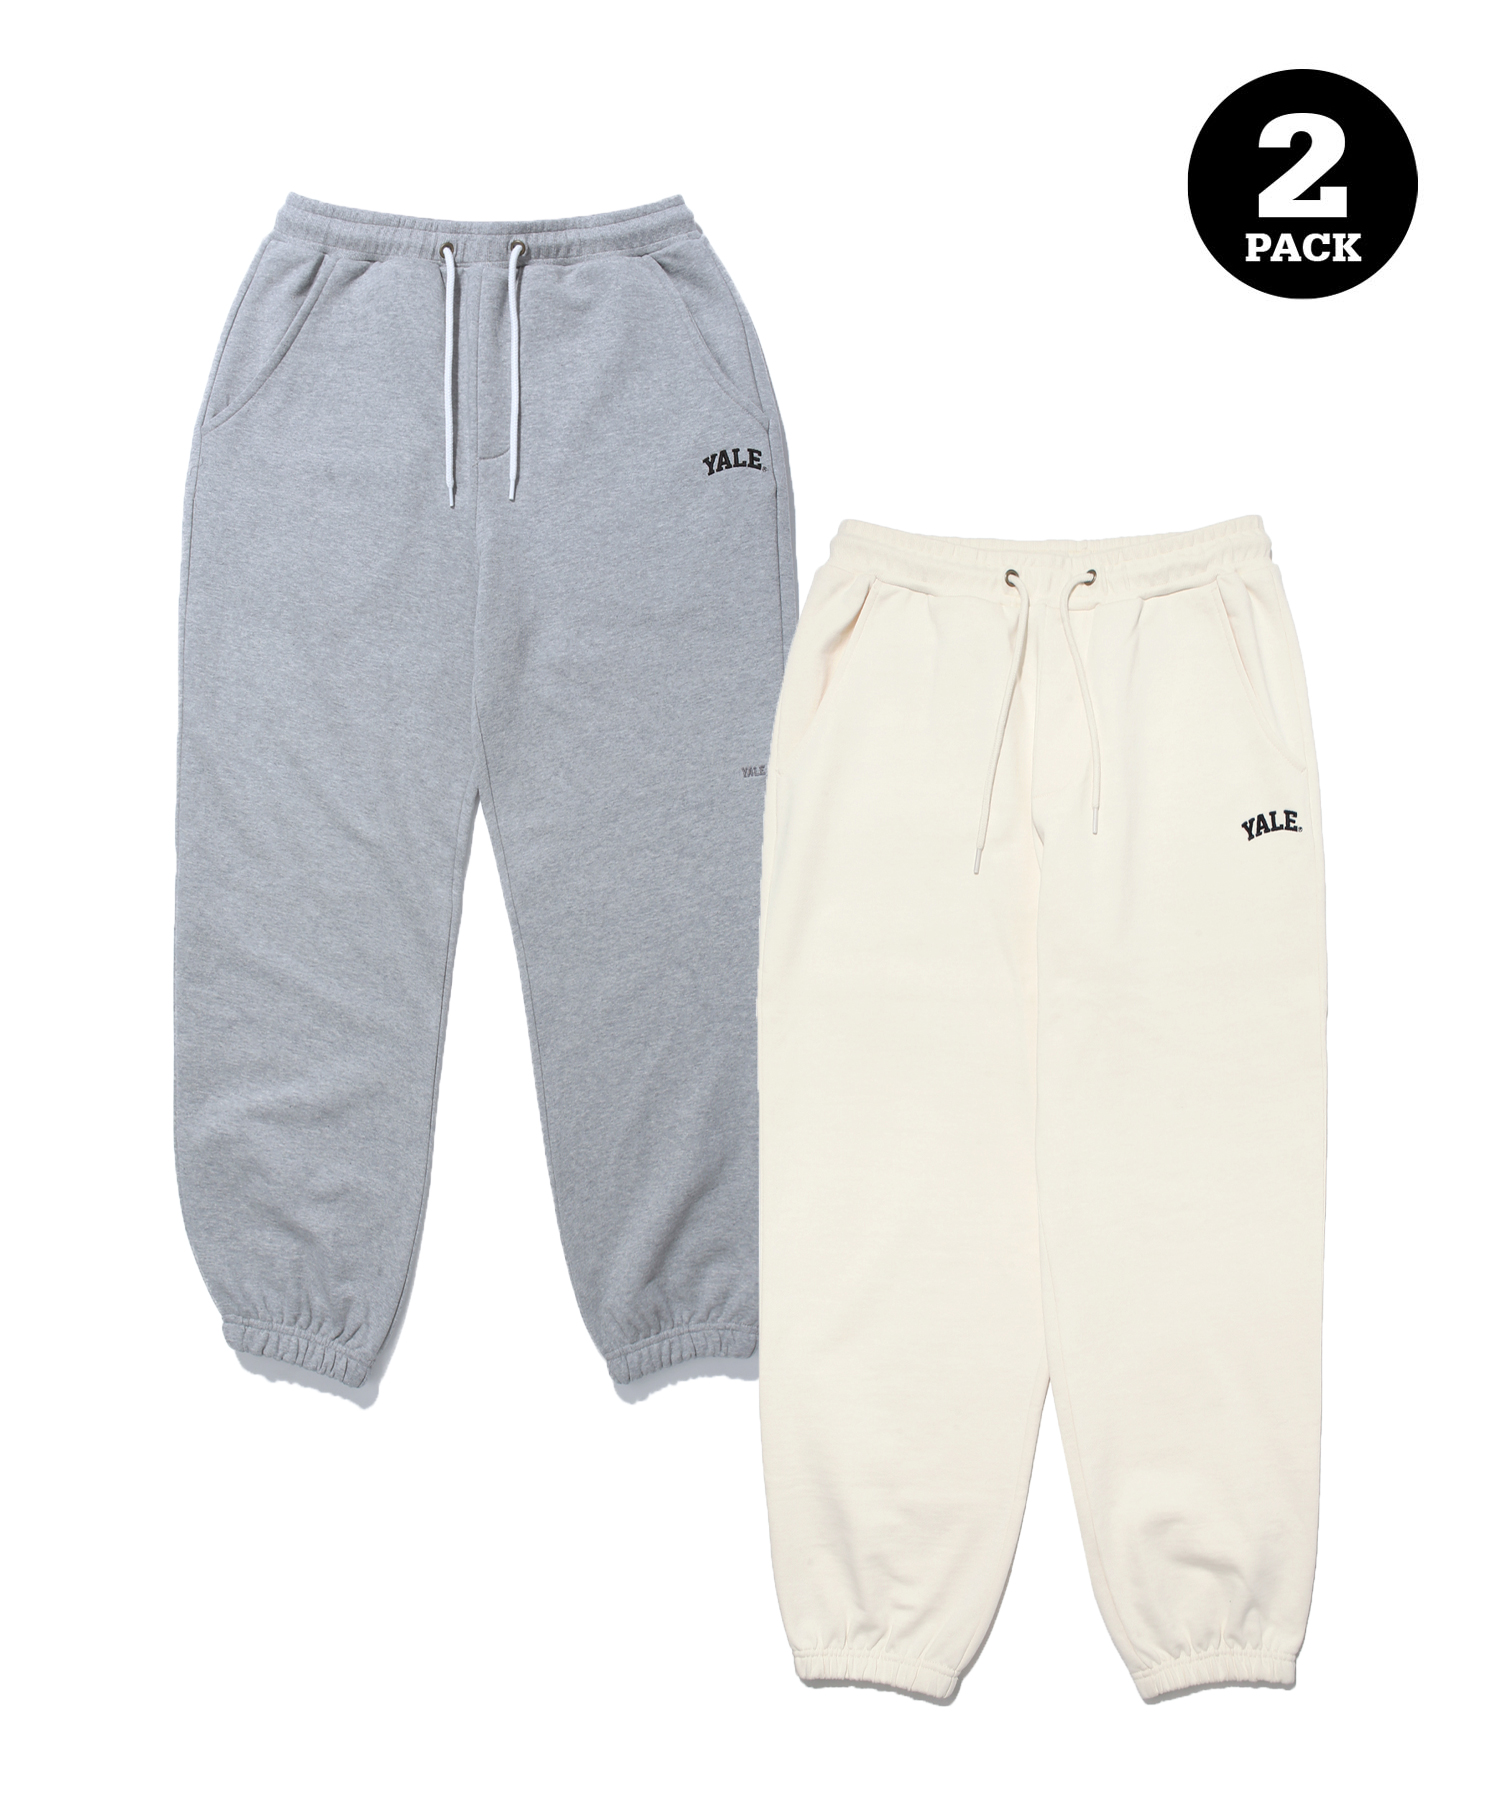 [ONEMILE WEAR] 2PACK SMALL ARCH SWEAT PANTS IVORY / BLACK